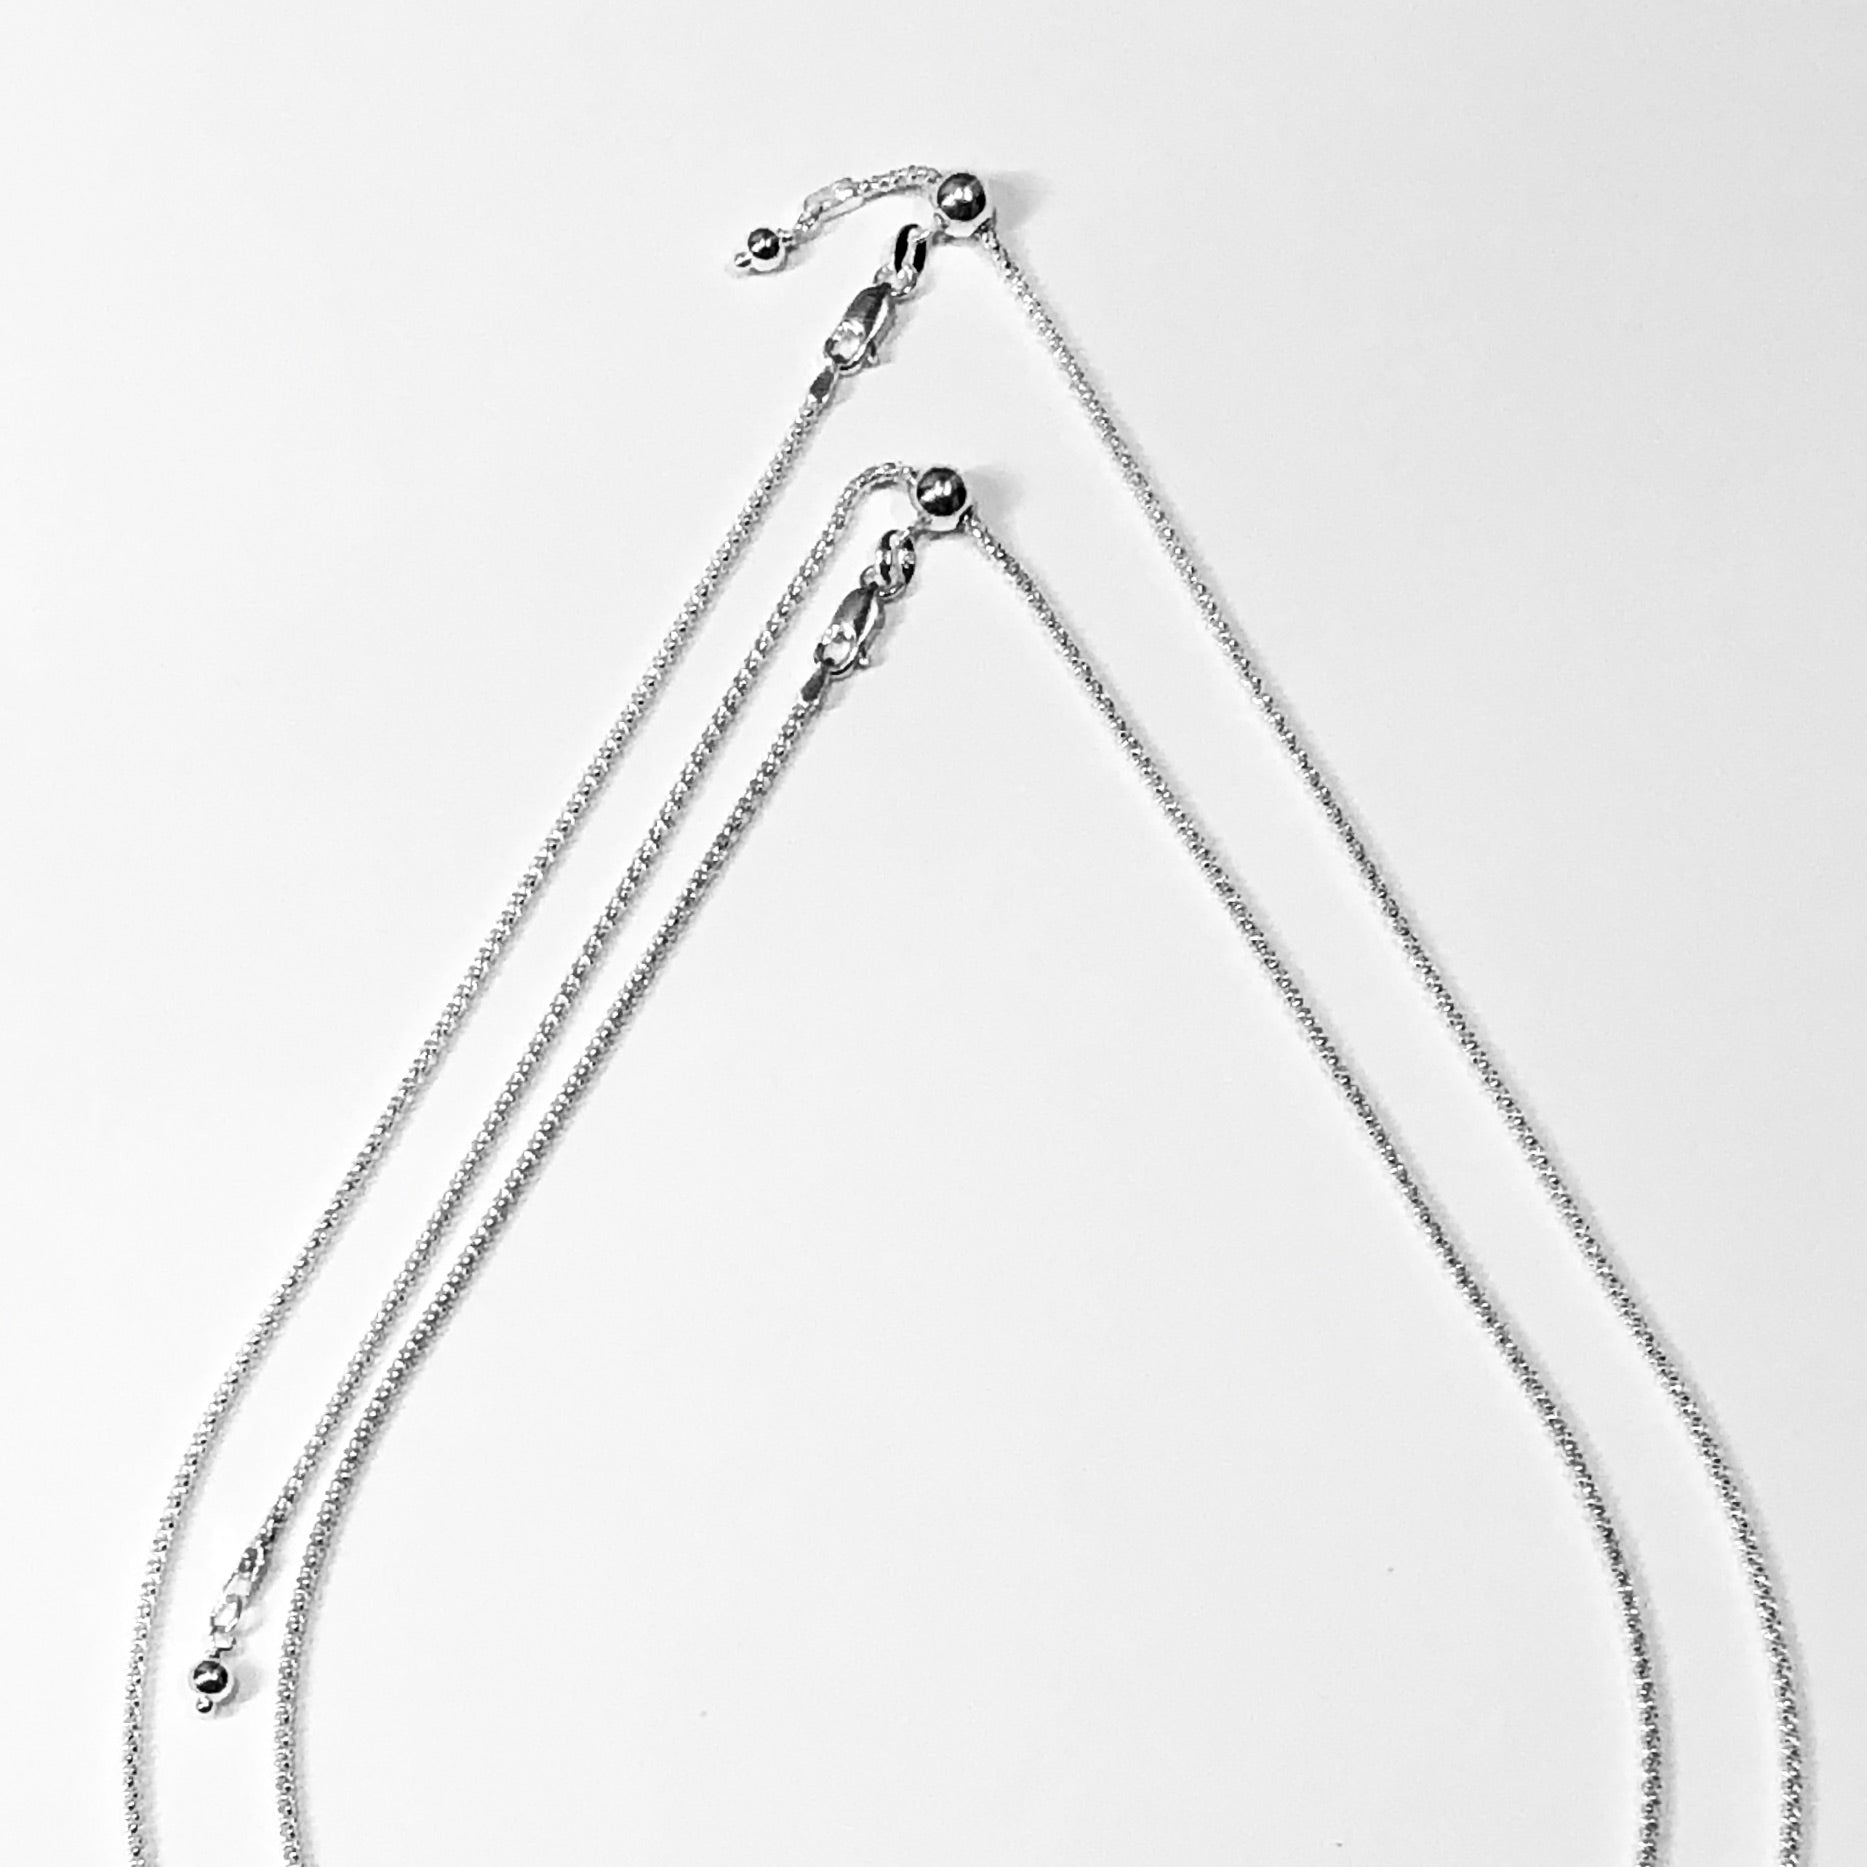 ADJUSTABLE LENGTH STERLING SILVER ITALIAN CHAIN